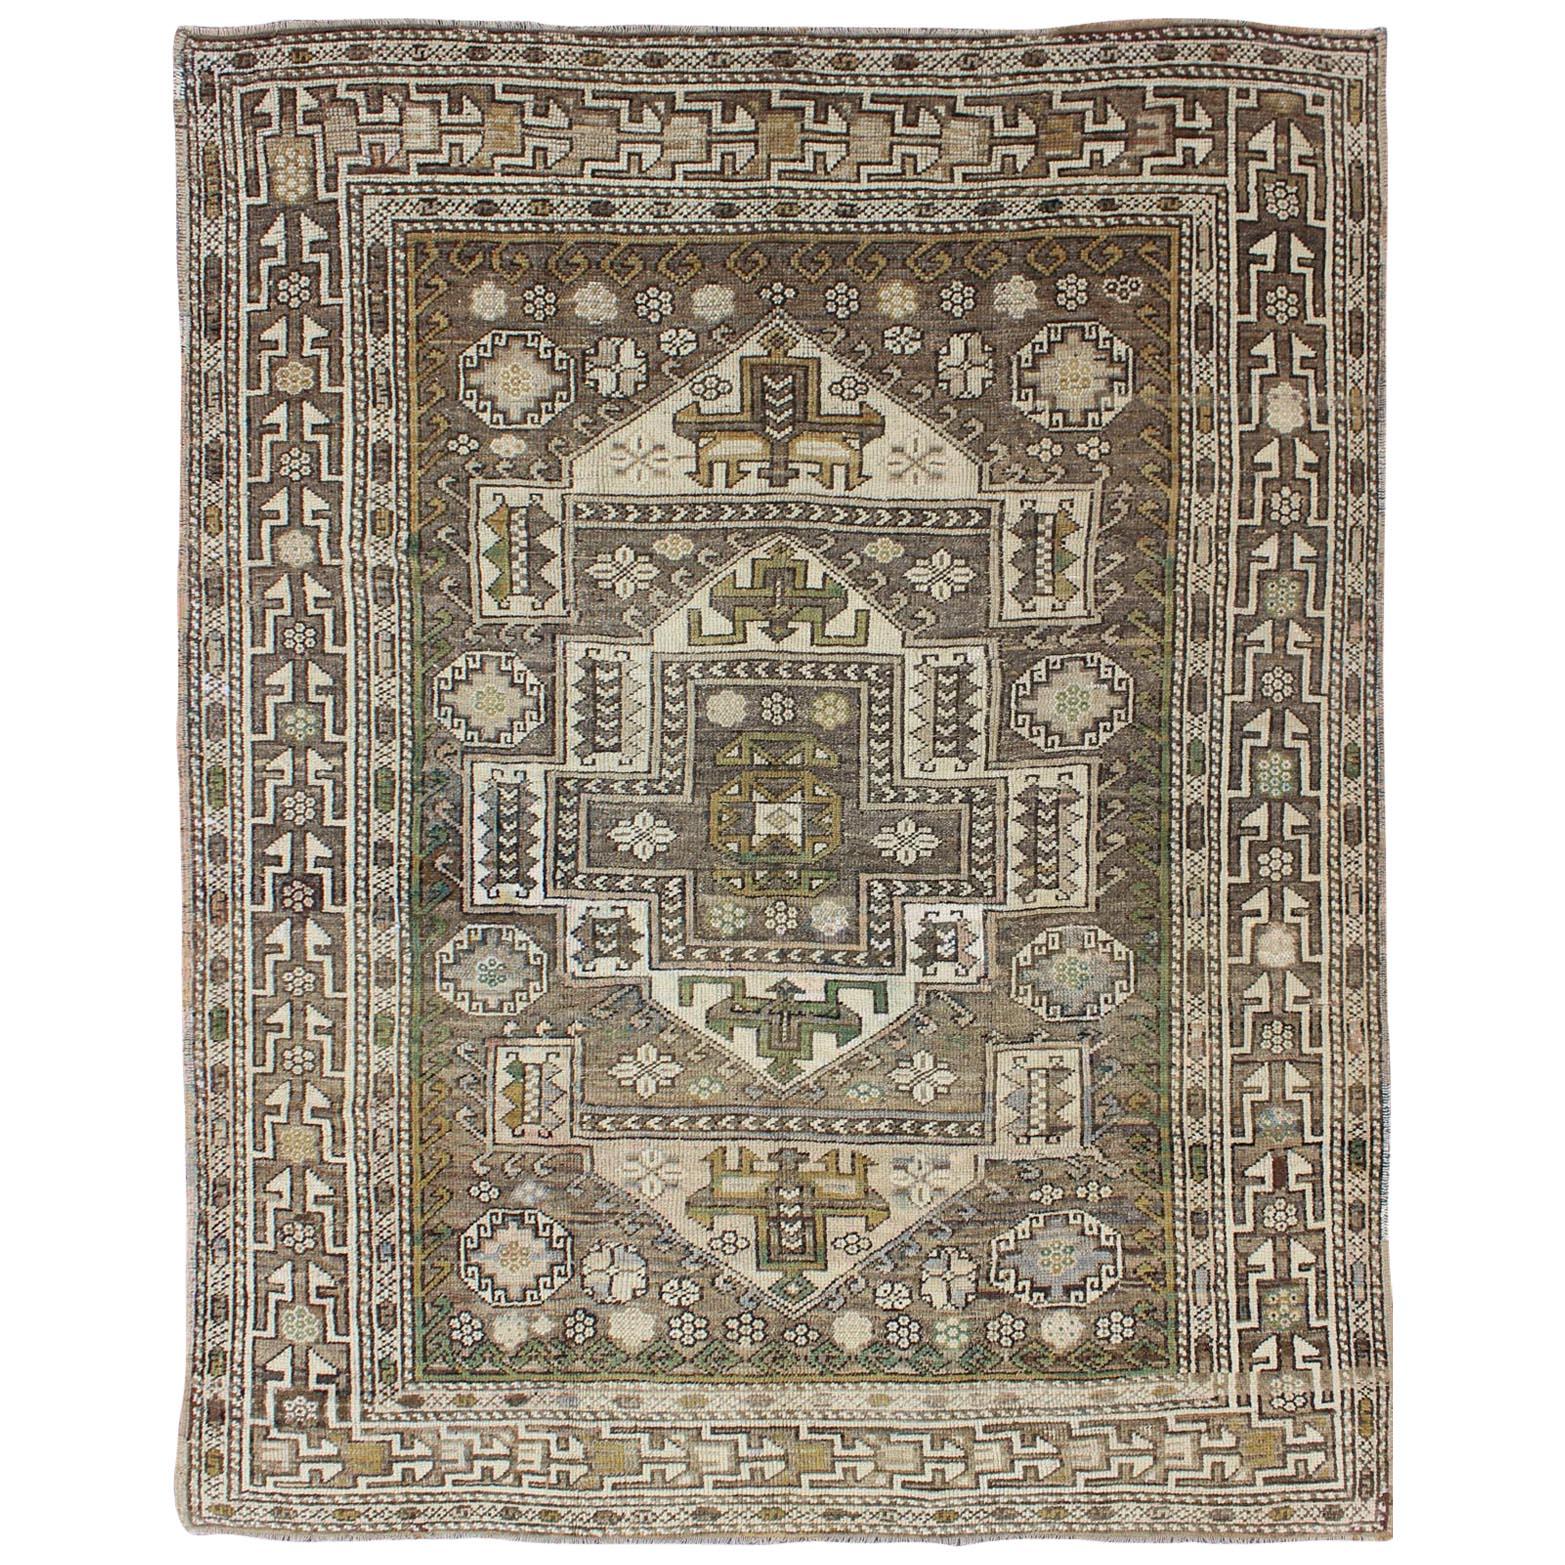 Antique Turkish Oushak Rug with Sub-Geometric Medallion in Green and Brown